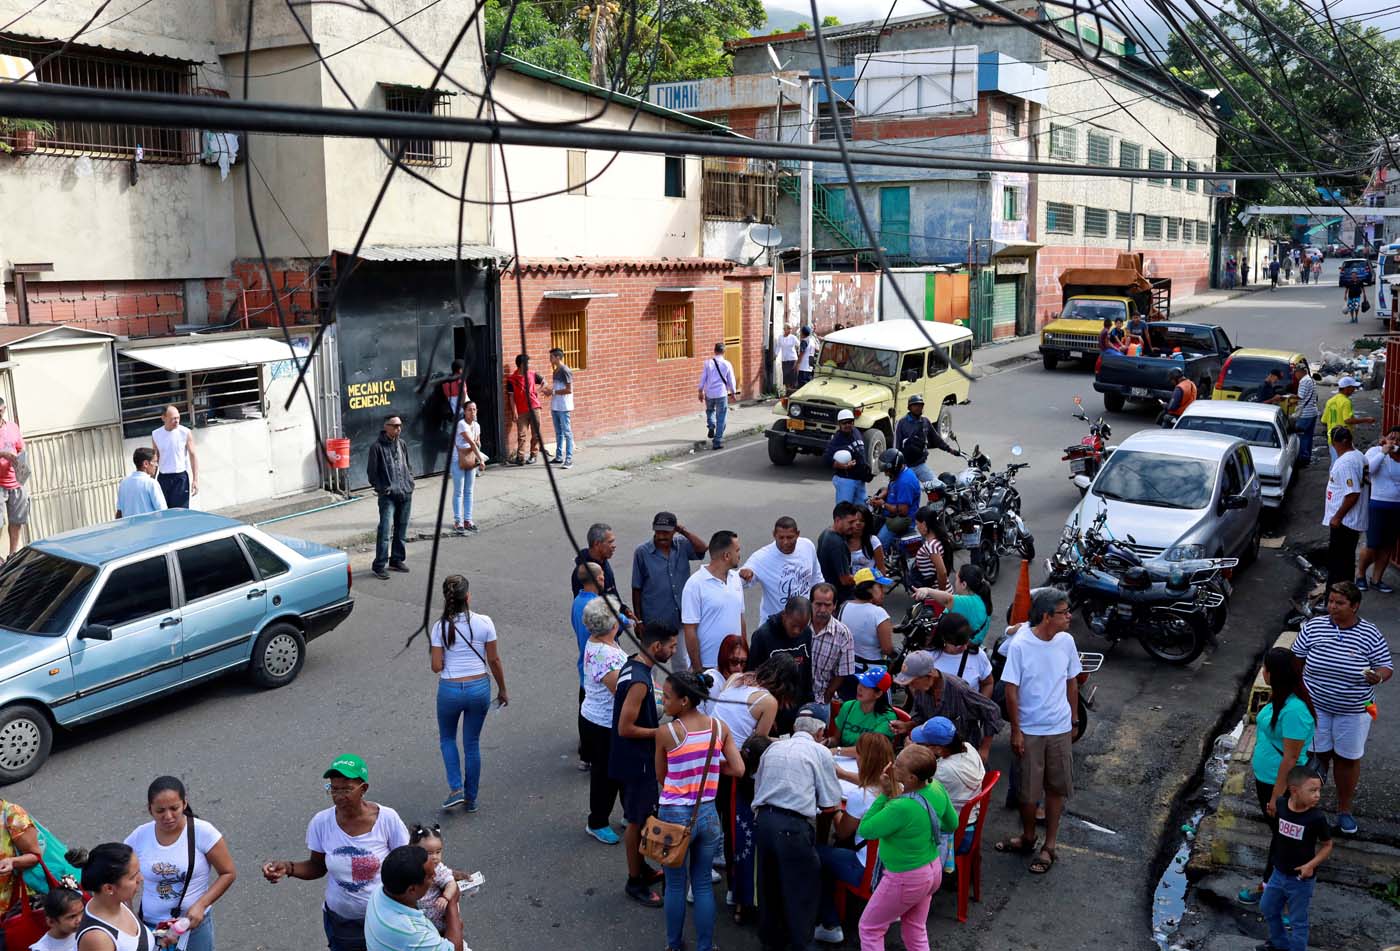 People gather at a polling station during an unofficial plebiscite against Venezuela's President Nicolas Maduro's government and his plan to rewrite the constitution, in Caracas, Venezuela July 16, 2017. REUTERS/Marco Bello